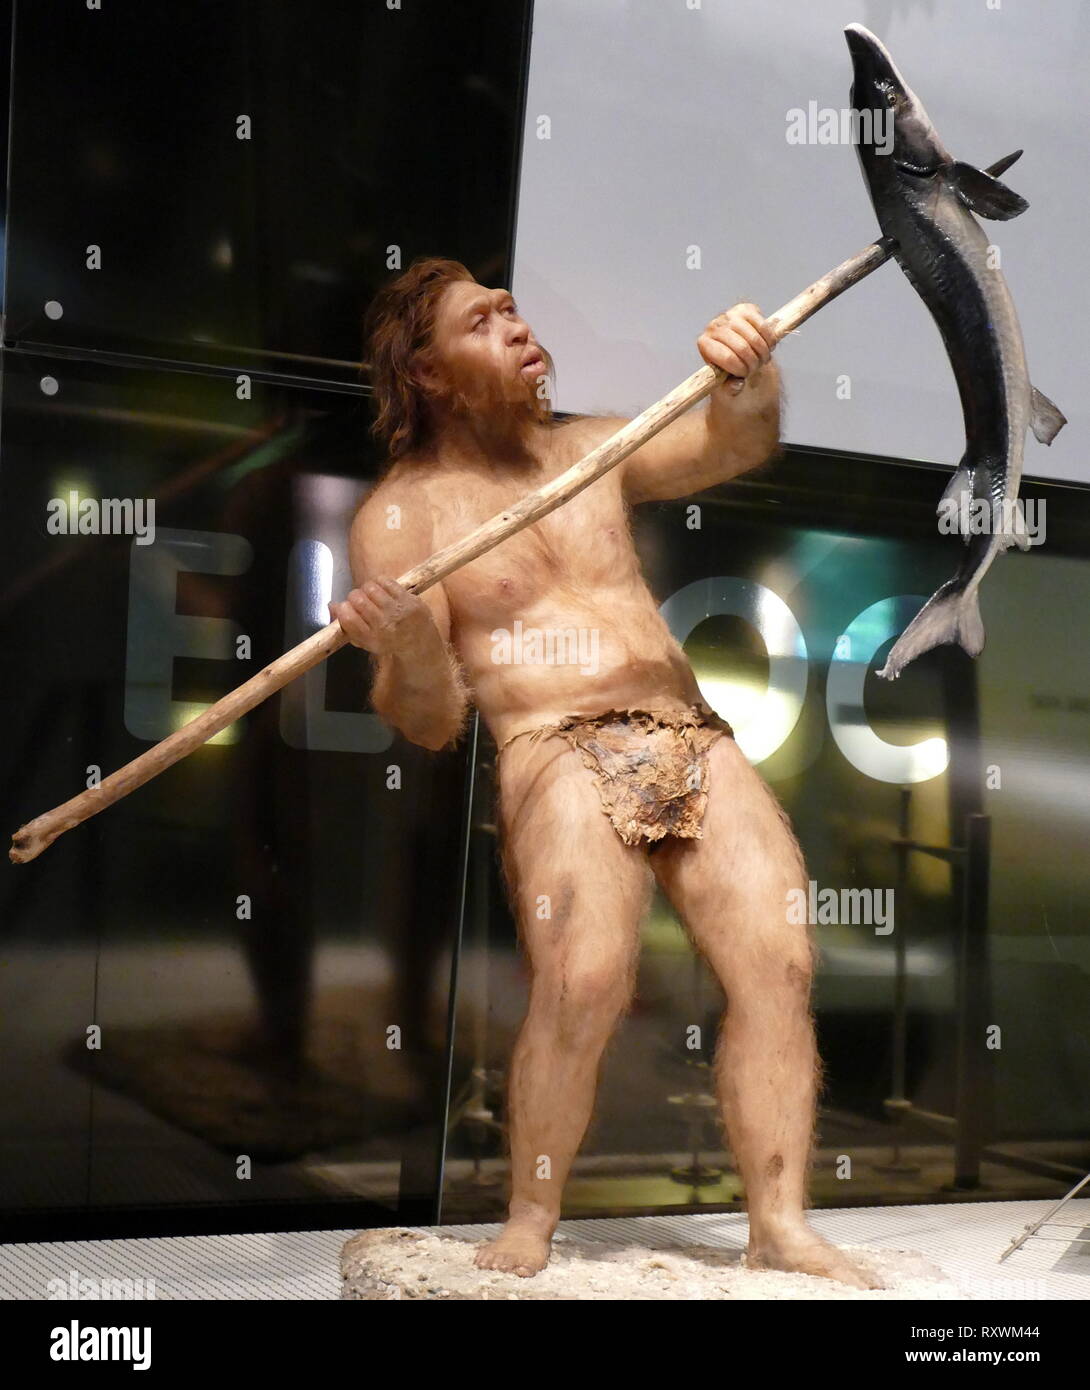 HOMO NEANDERTHALENSIS, The Neanderthals lived in Europe and the Near East between 200,000 and 30,000 years ago. They were a species similar to ours, though we are not directly related to them. They grew to almost 170 cm tall and were extremely strong. Their cranial capacity was some 7,500 cm3, more than ours, which is 7,350 cm3, though this does not mean they were more intelligent than us. Their braincases were long and flat, and their noses and mouths projected forwards. Sapiens and Neanderthals occupied the same territory until the Neanderthals eventually became extinct. Sculpture by Elisabe Stock Photo